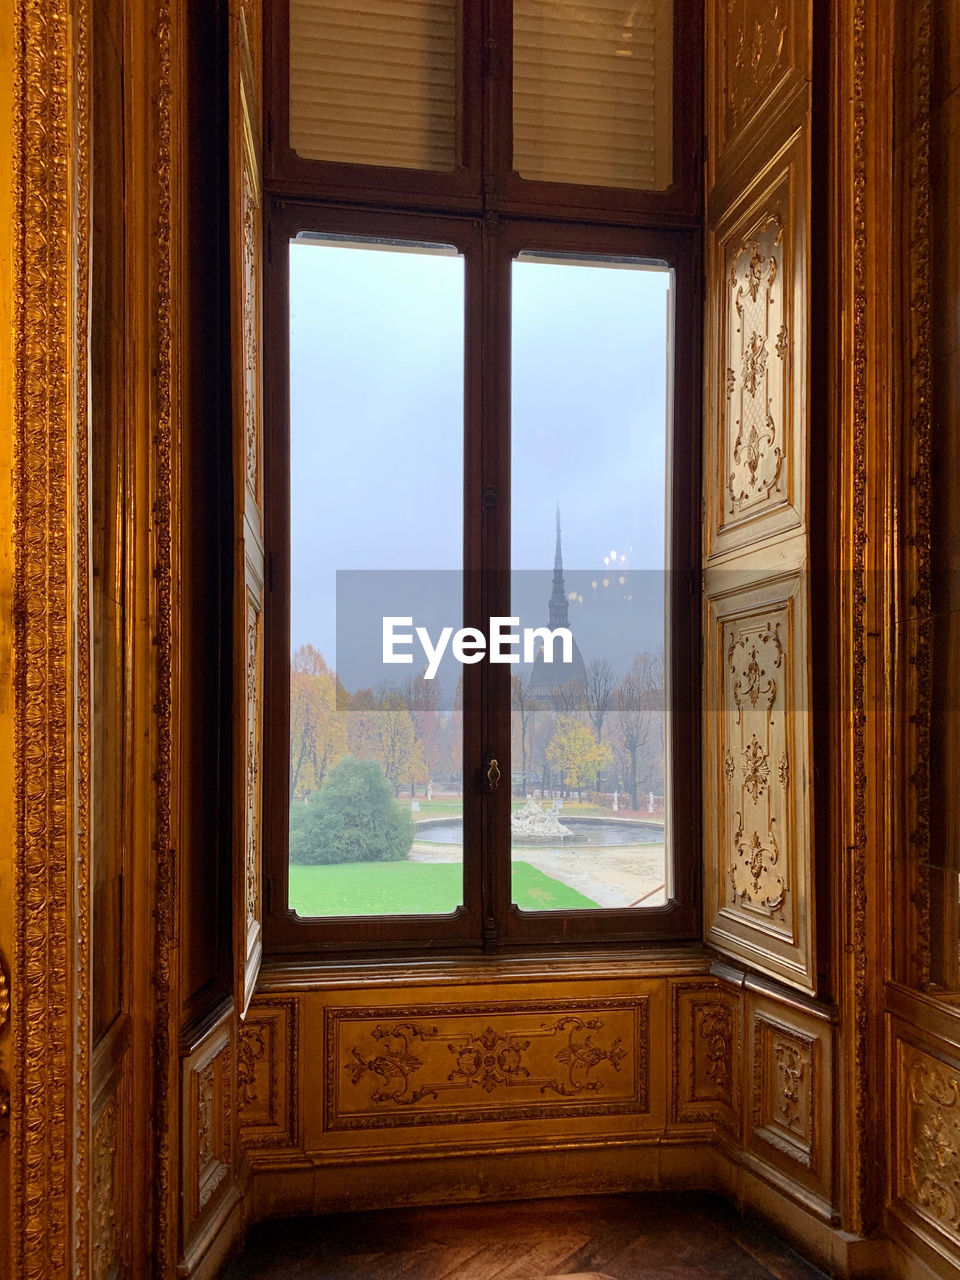 Trees seen through window of the palace.